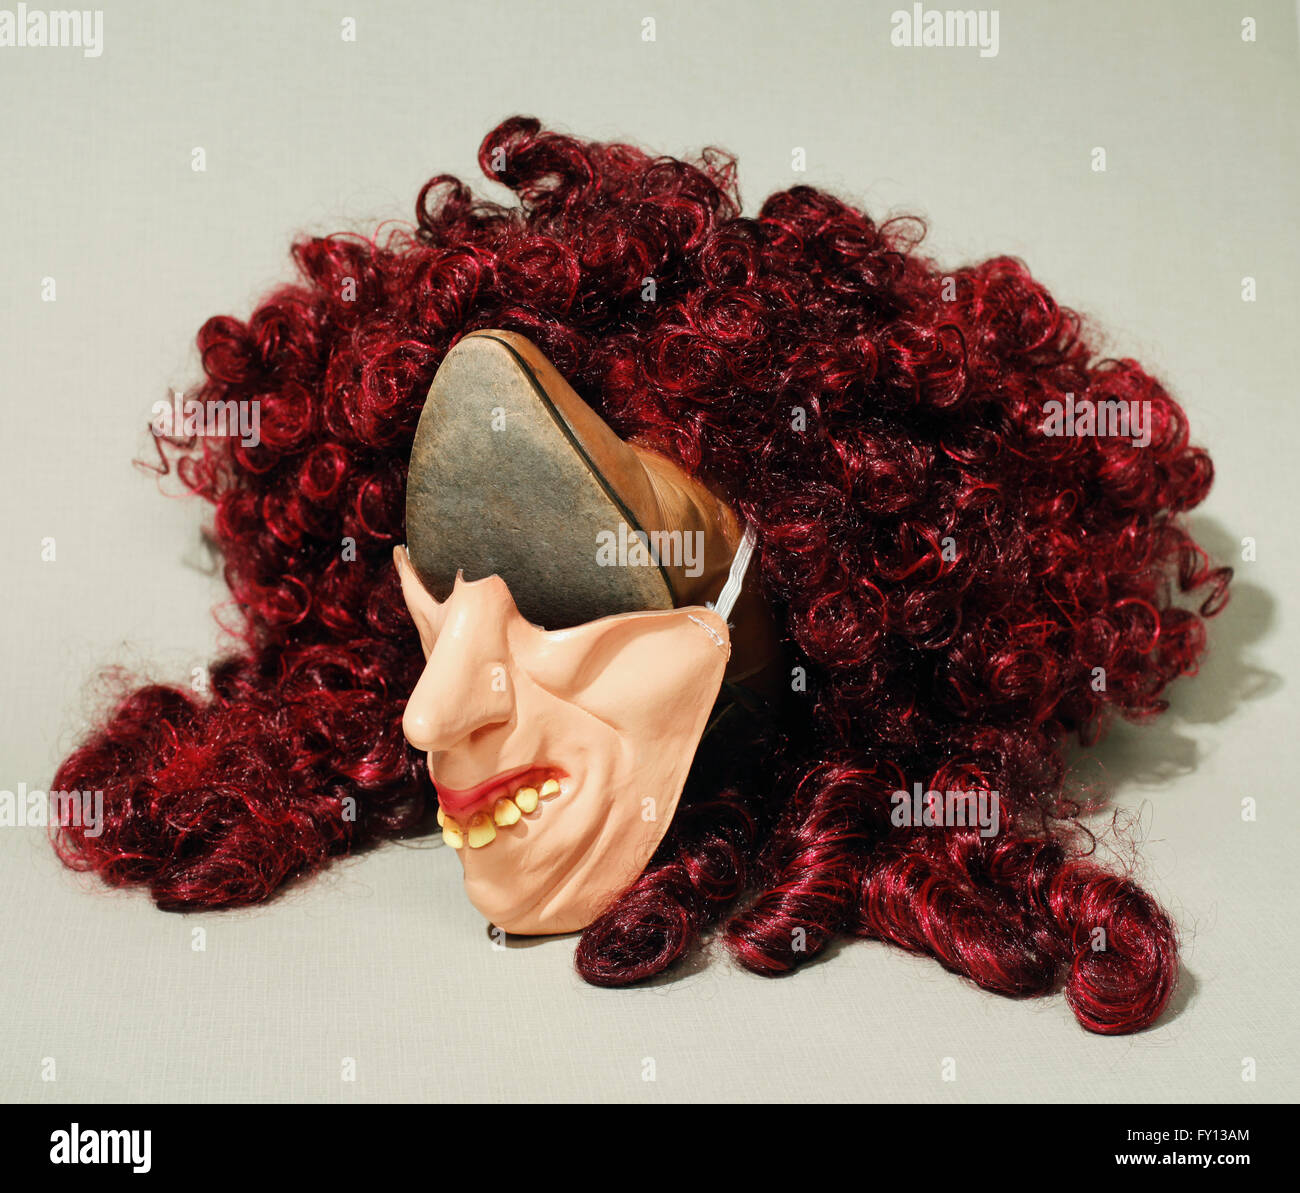 Face made from shoe, mask and wig over grey background Stock Photo